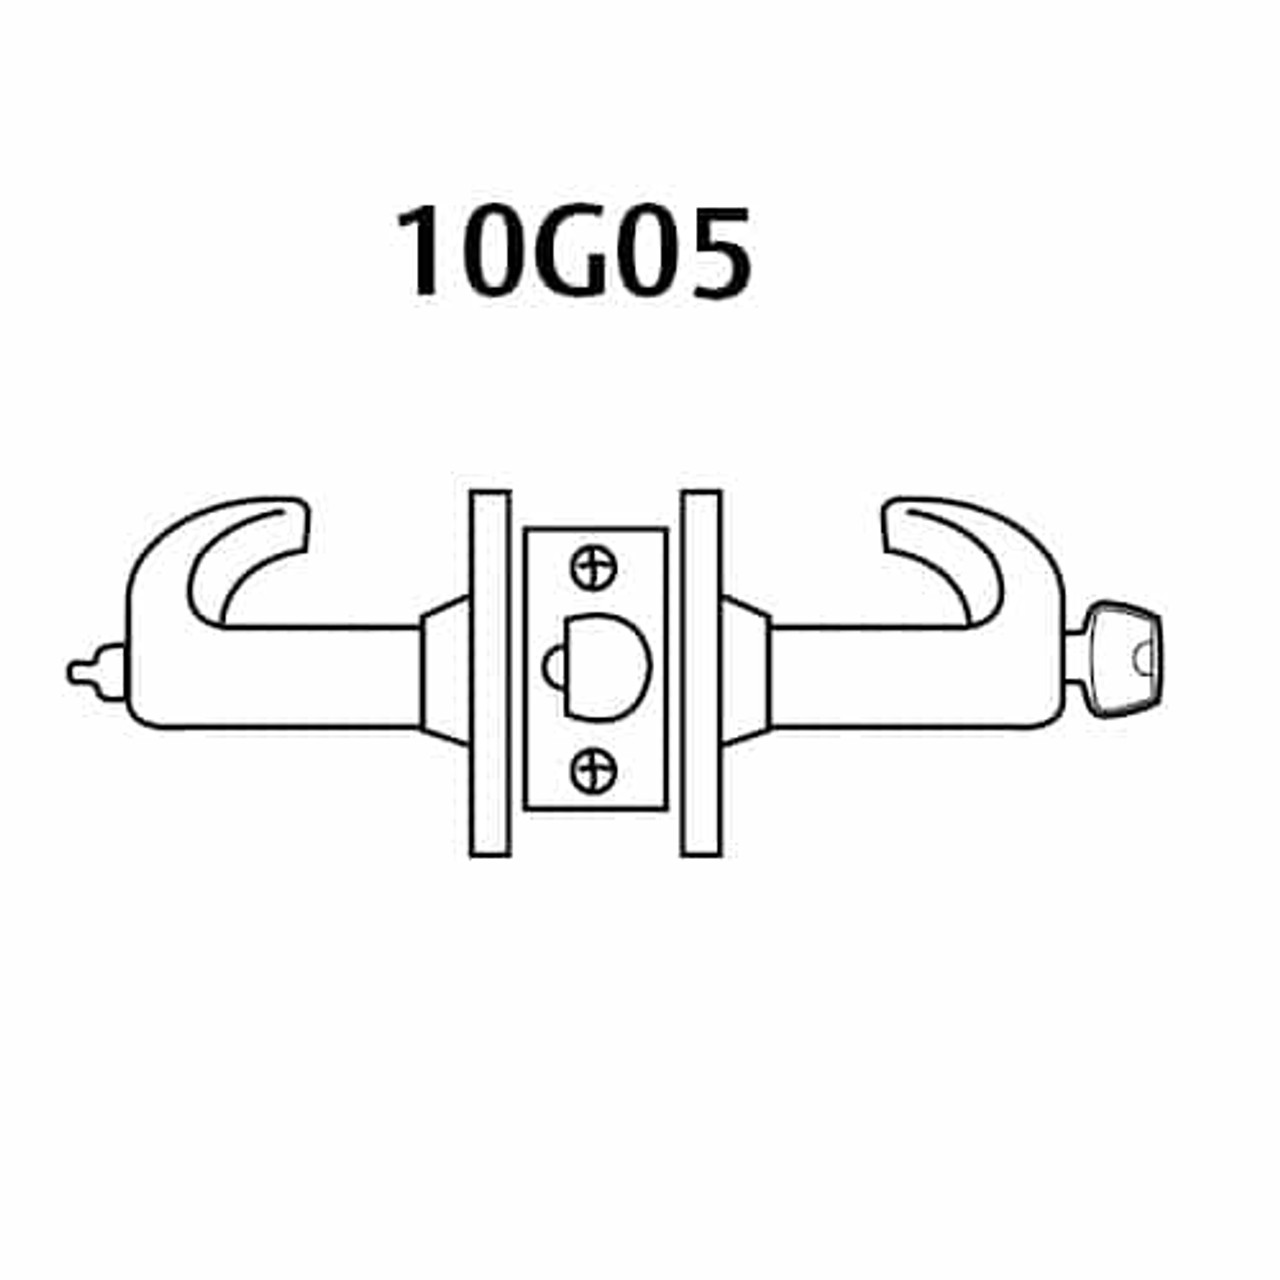 2860-10G05-LL-10B Sargent 10 Line Cylindrical Entry/Office Locks with L Lever Design and L Rose Prepped for LFIC in Oxidized Dull Bronze